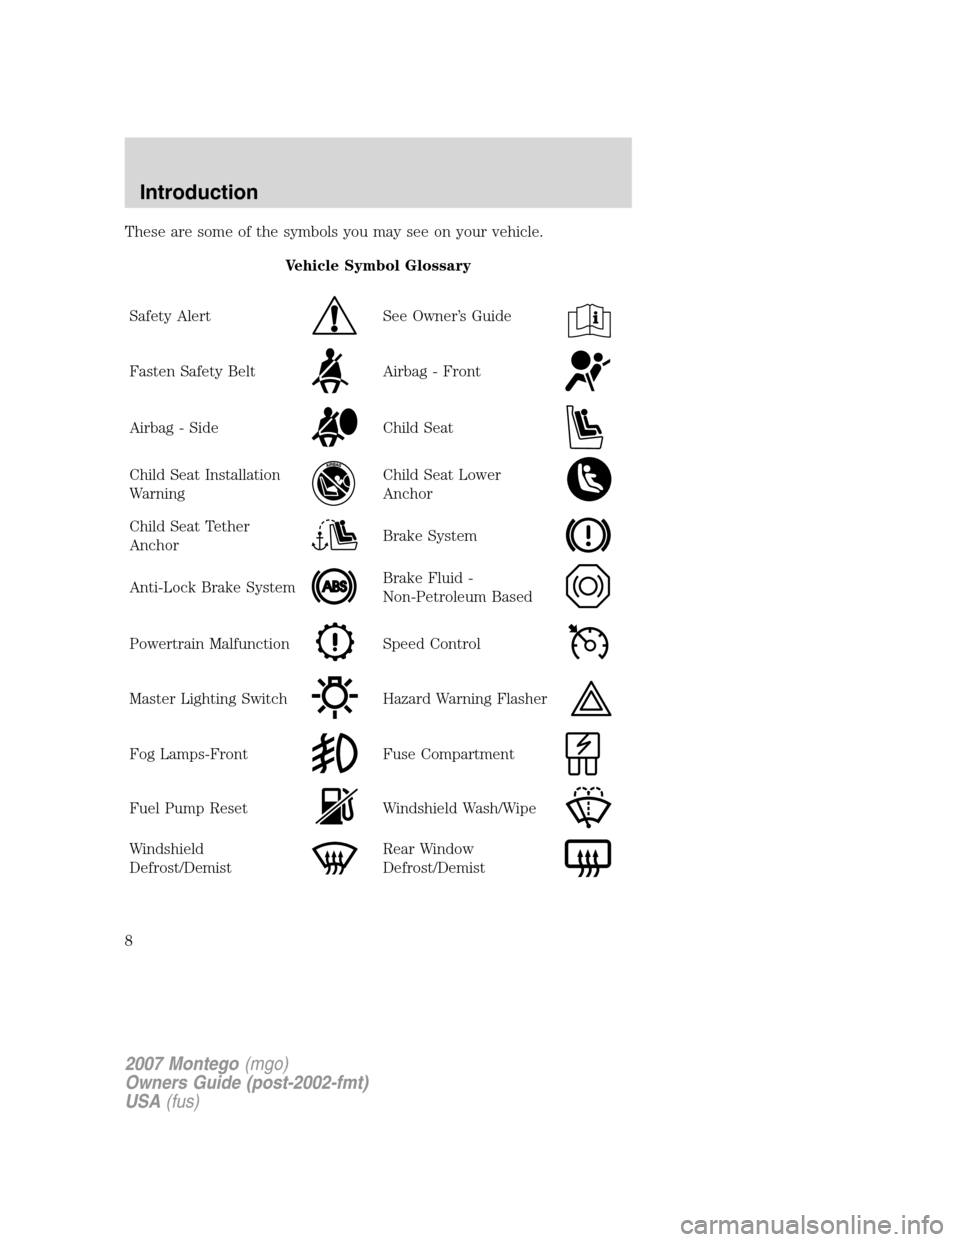 Mercury Montego 2007  Owners Manuals These are some of the symbols you may see on your vehicle.
Vehicle Symbol Glossary
Safety Alert
See Owner’s Guide
Fasten Safety BeltAirbag - Front
Airbag - SideChild Seat
Child Seat Installation
War